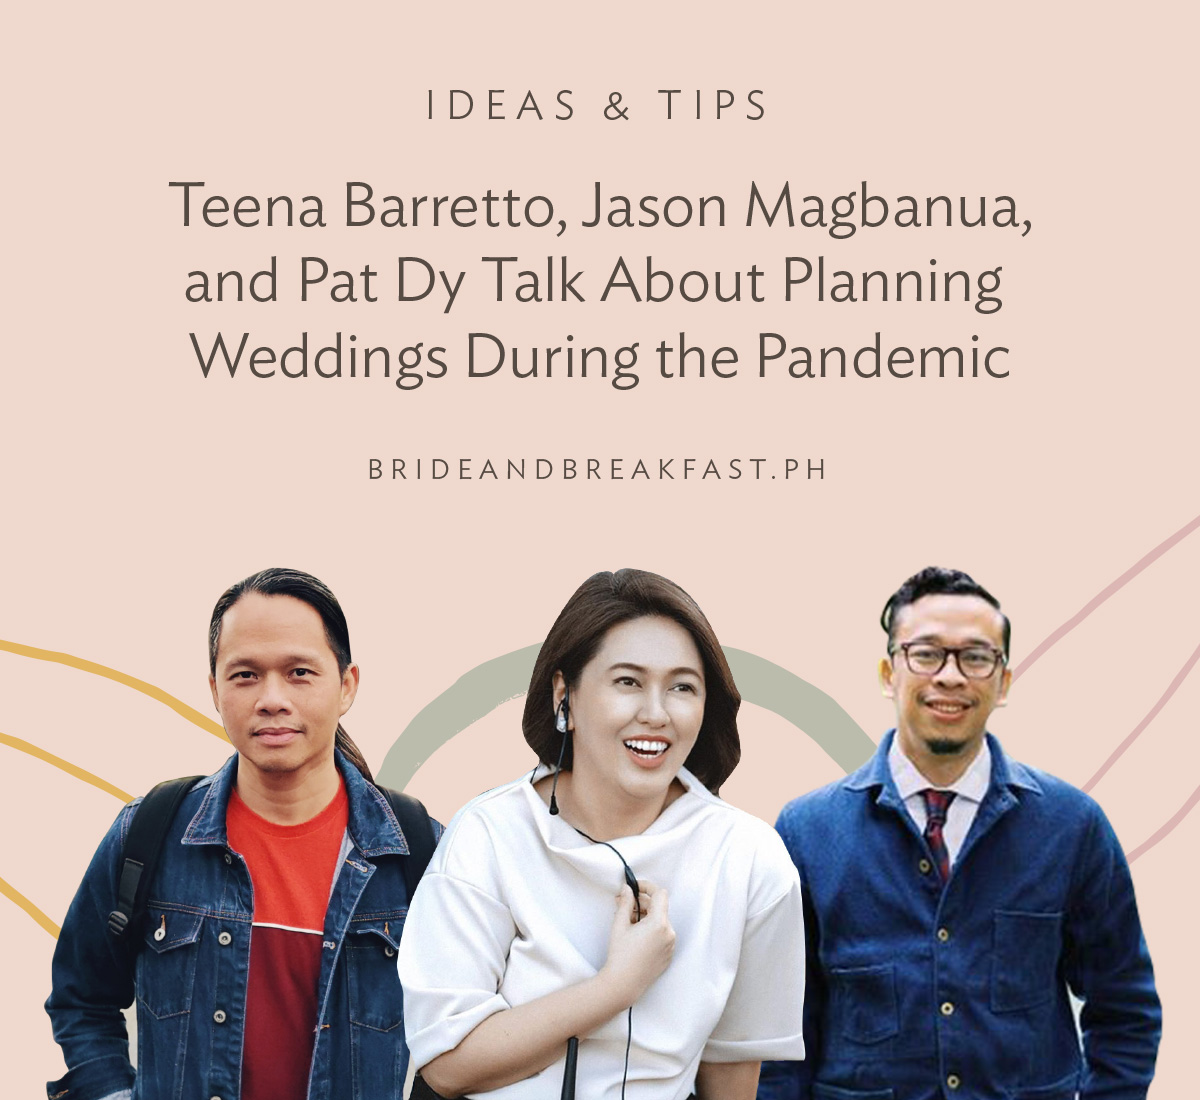 Teena Barretto, Jason Magbanua, and Pat Dy Talk About Planning Weddings During the Pandemic